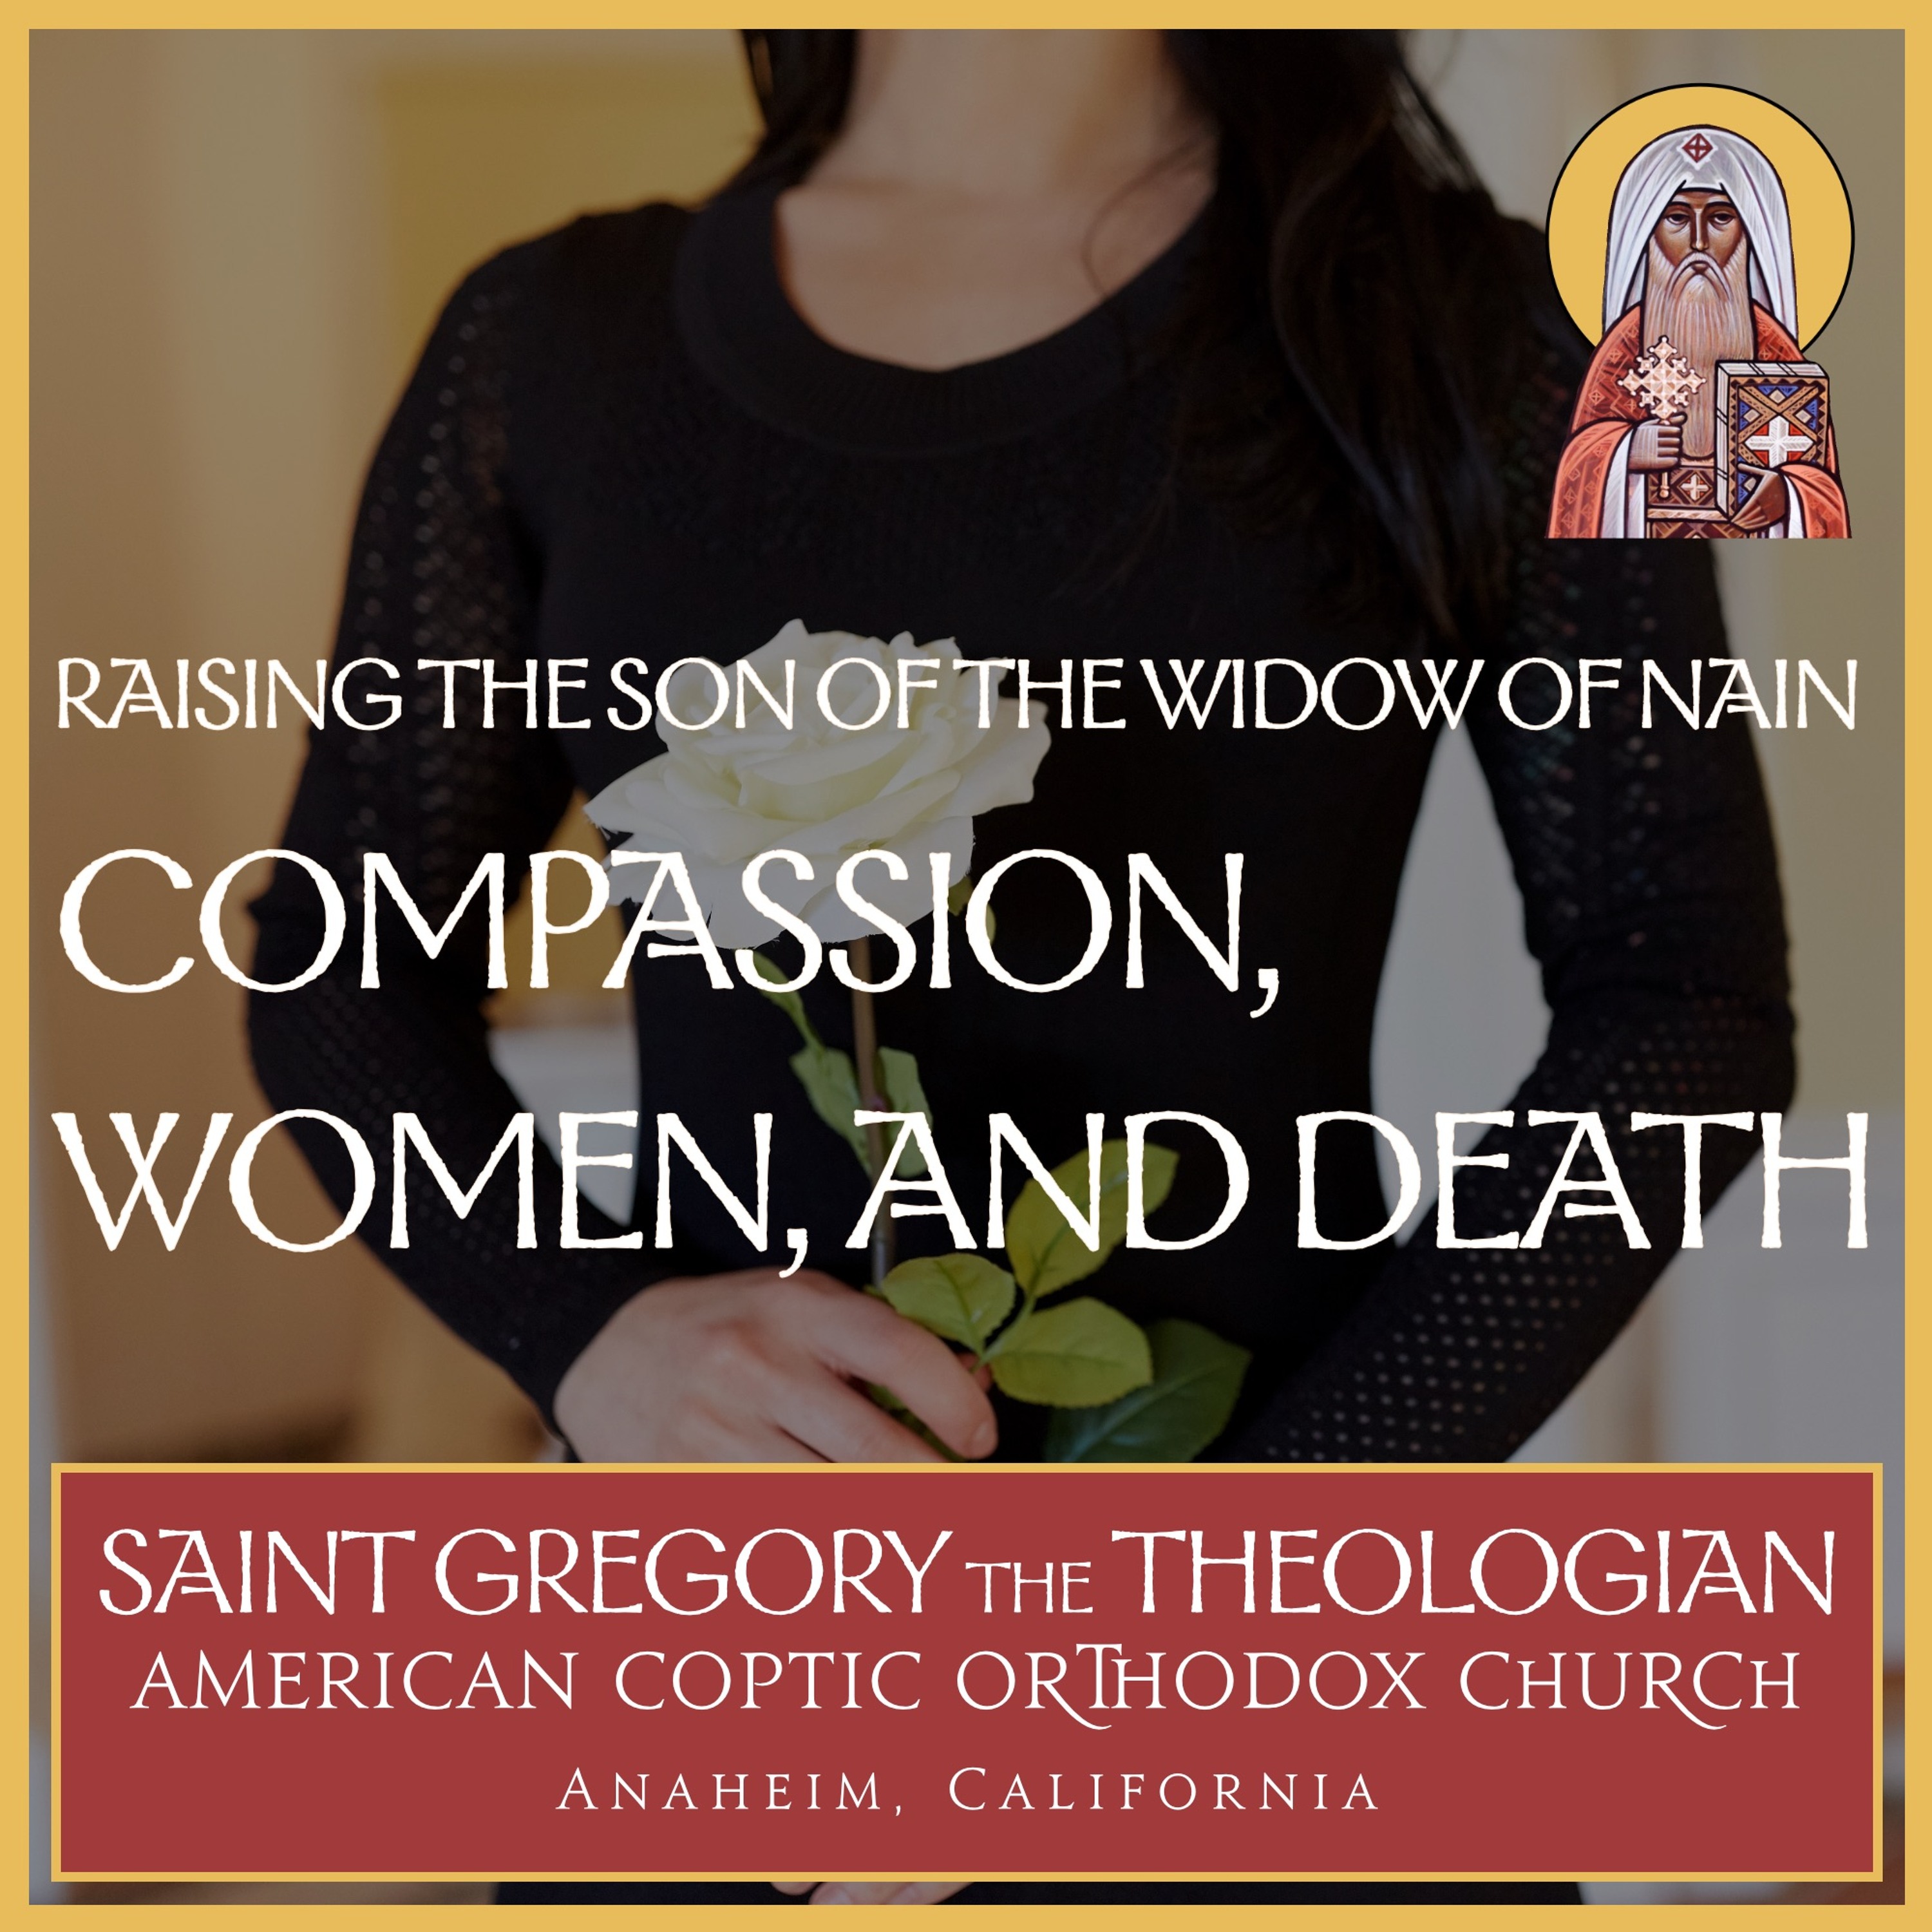 Raising the Son of the Widow of Nain: Compassion, Women, and Death (Lk 7:11-17)